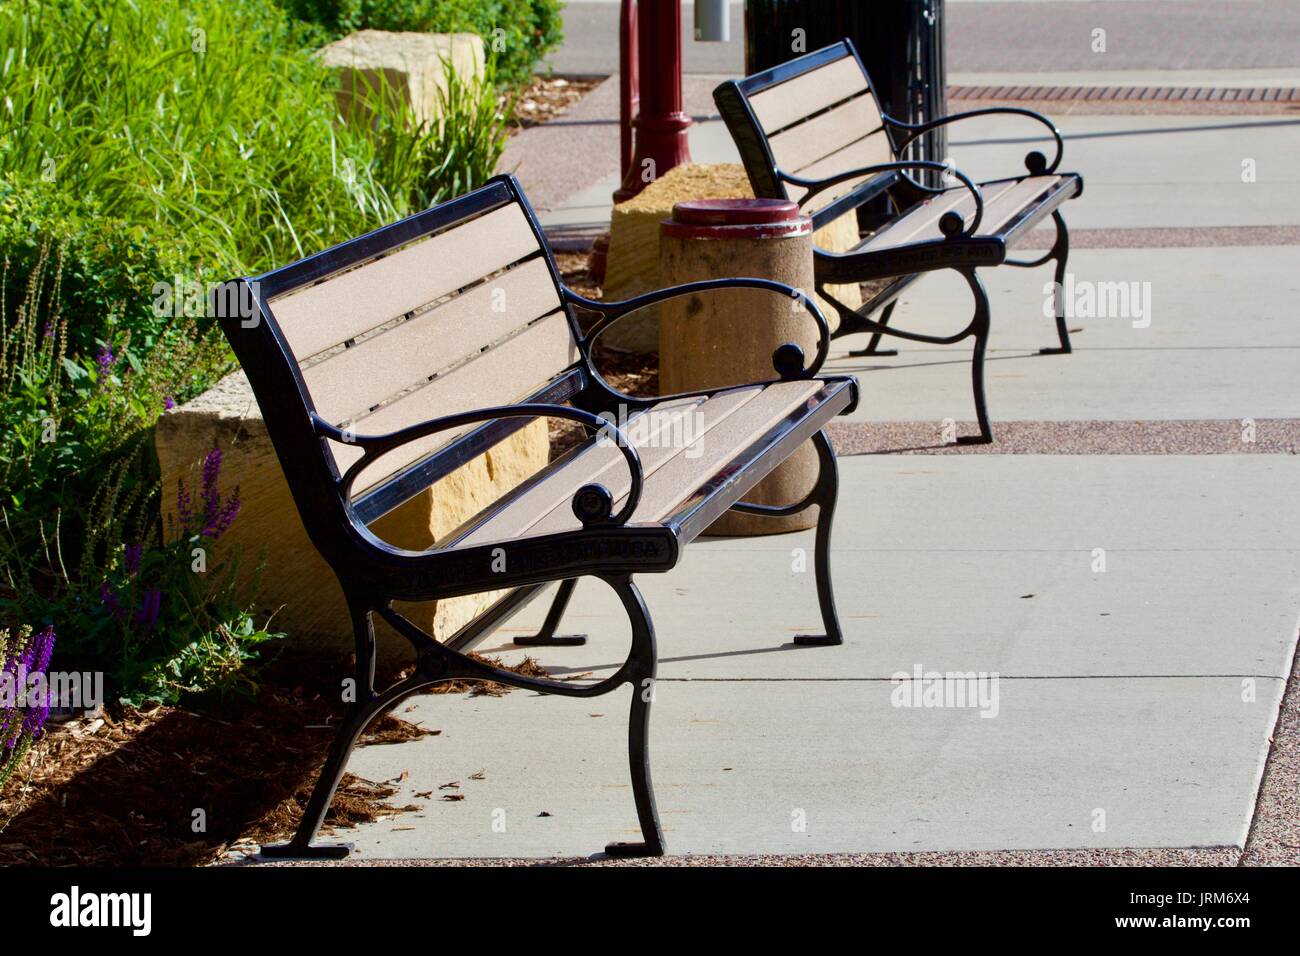 Fancy park benches Stock Photo